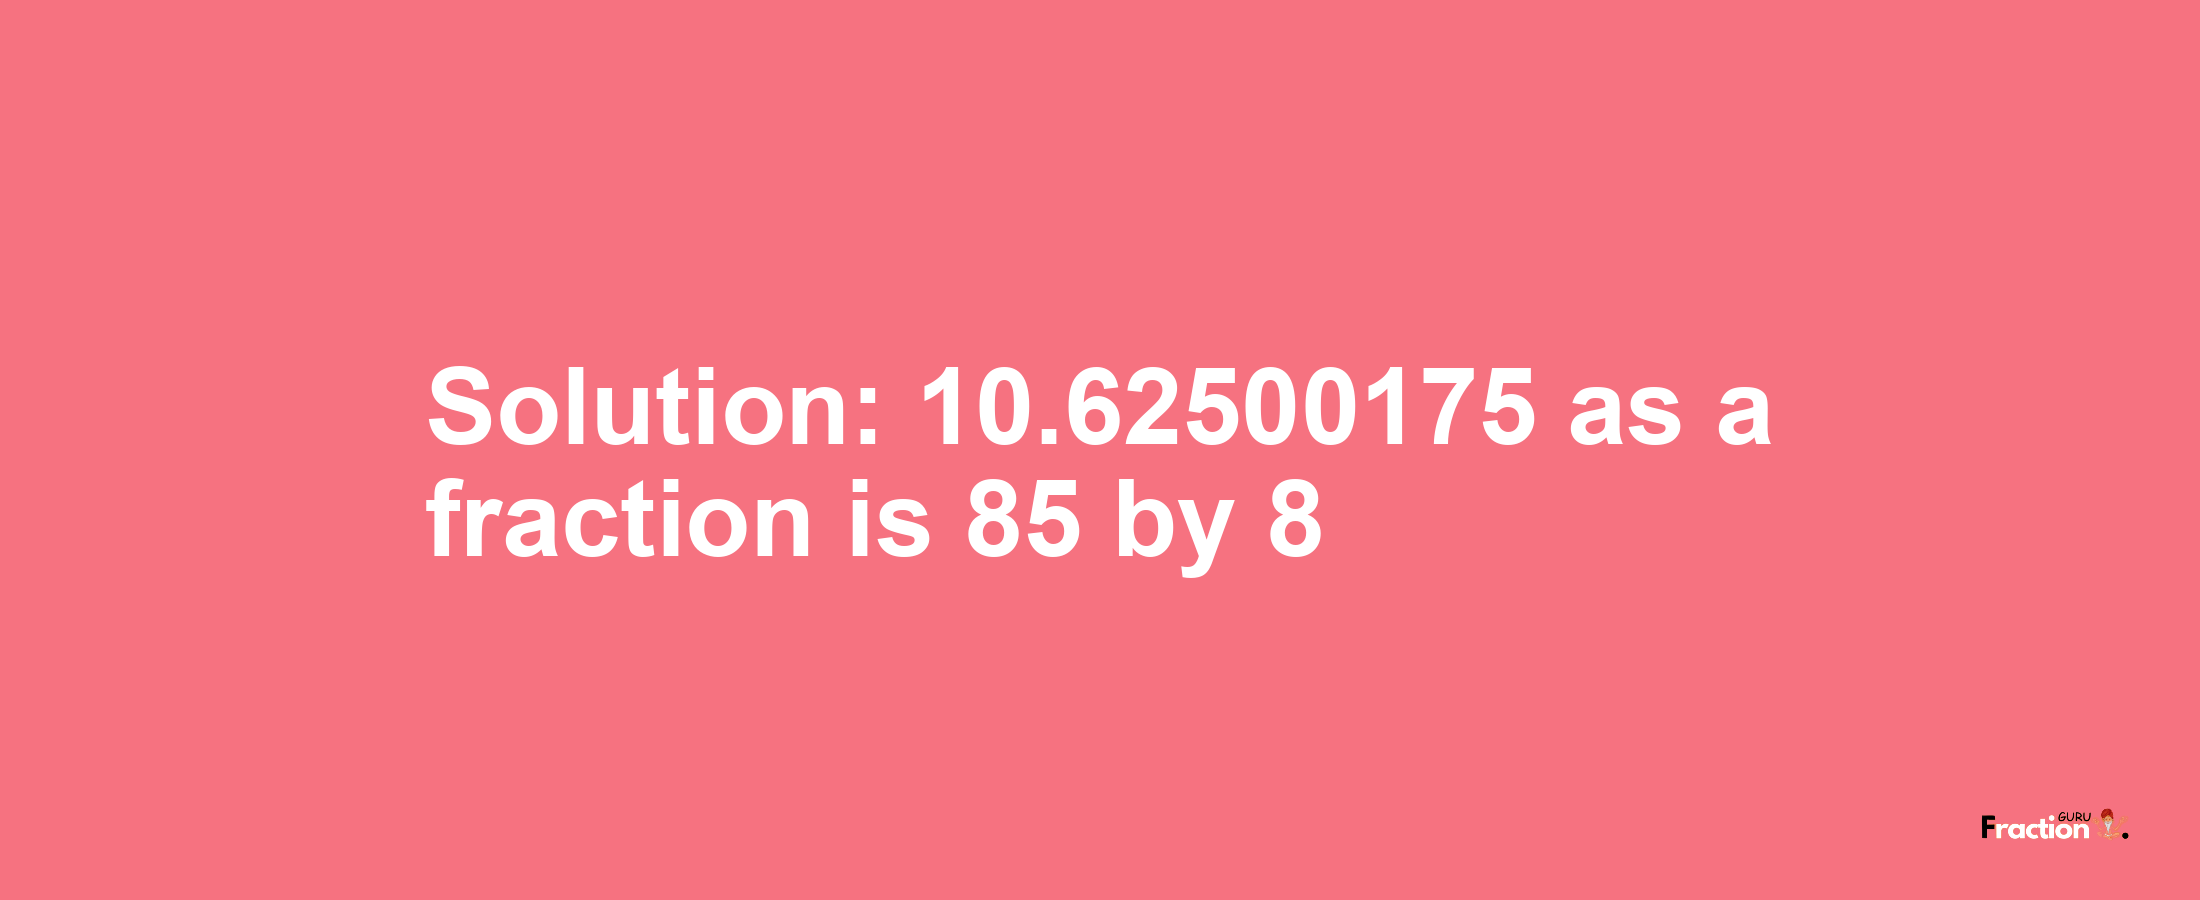 Solution:10.62500175 as a fraction is 85/8